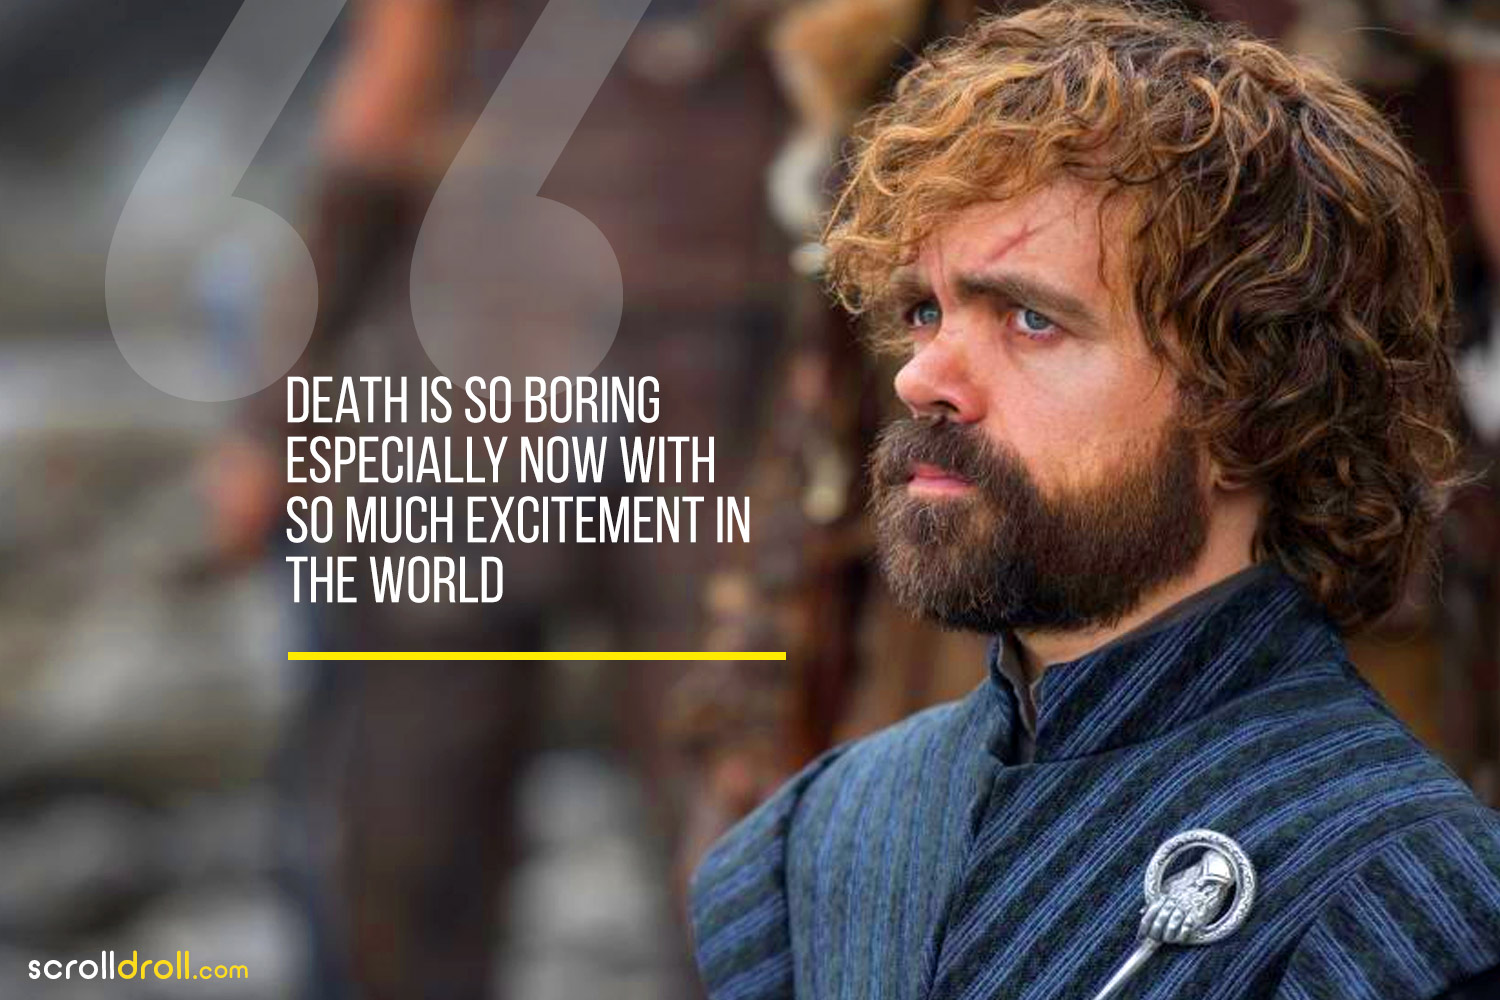 Tyrion Lannister Quotes (3)